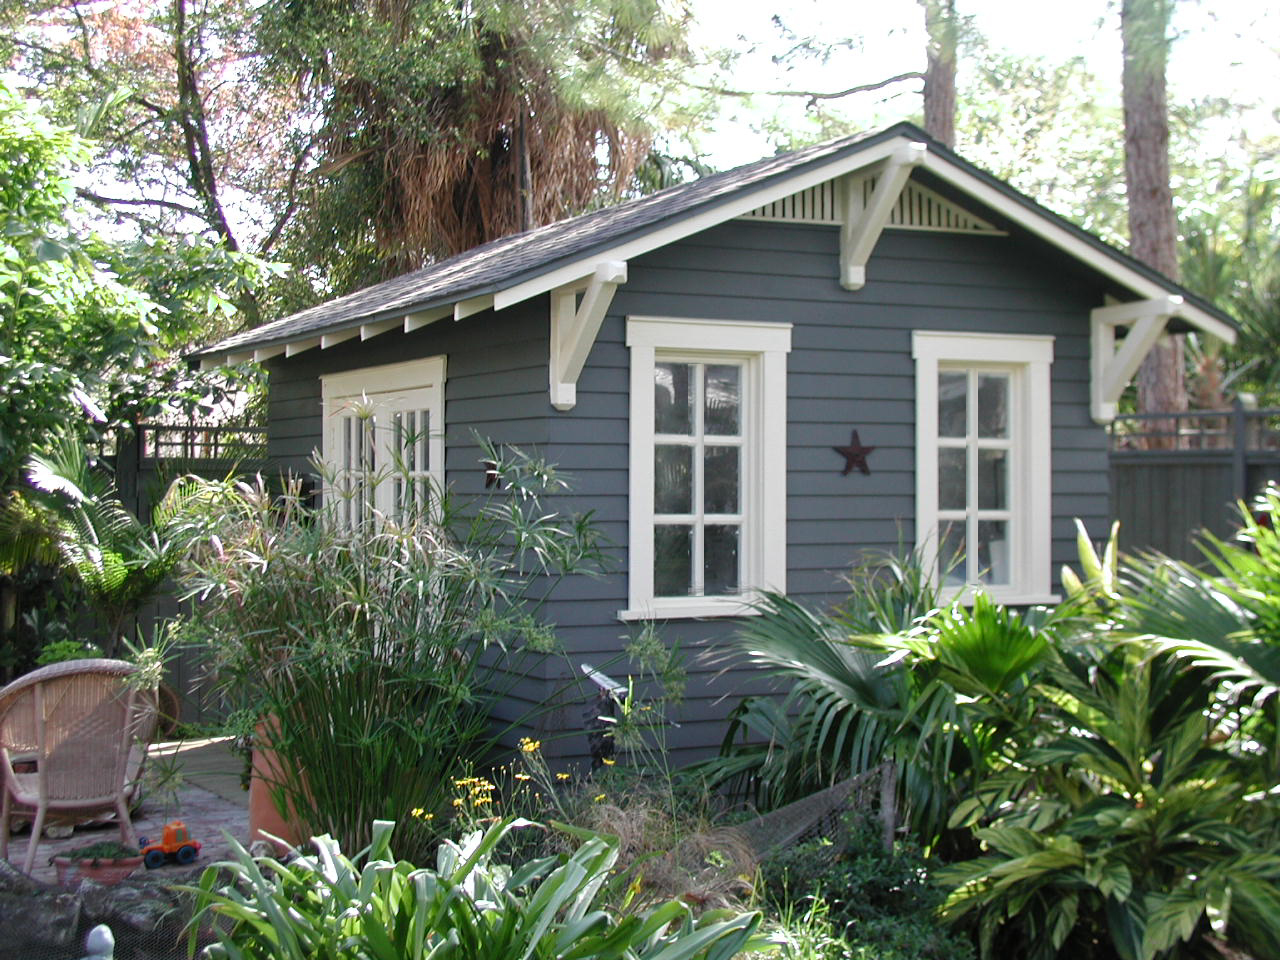 clearinghouse for information on backyard cottages (detached adu's ...